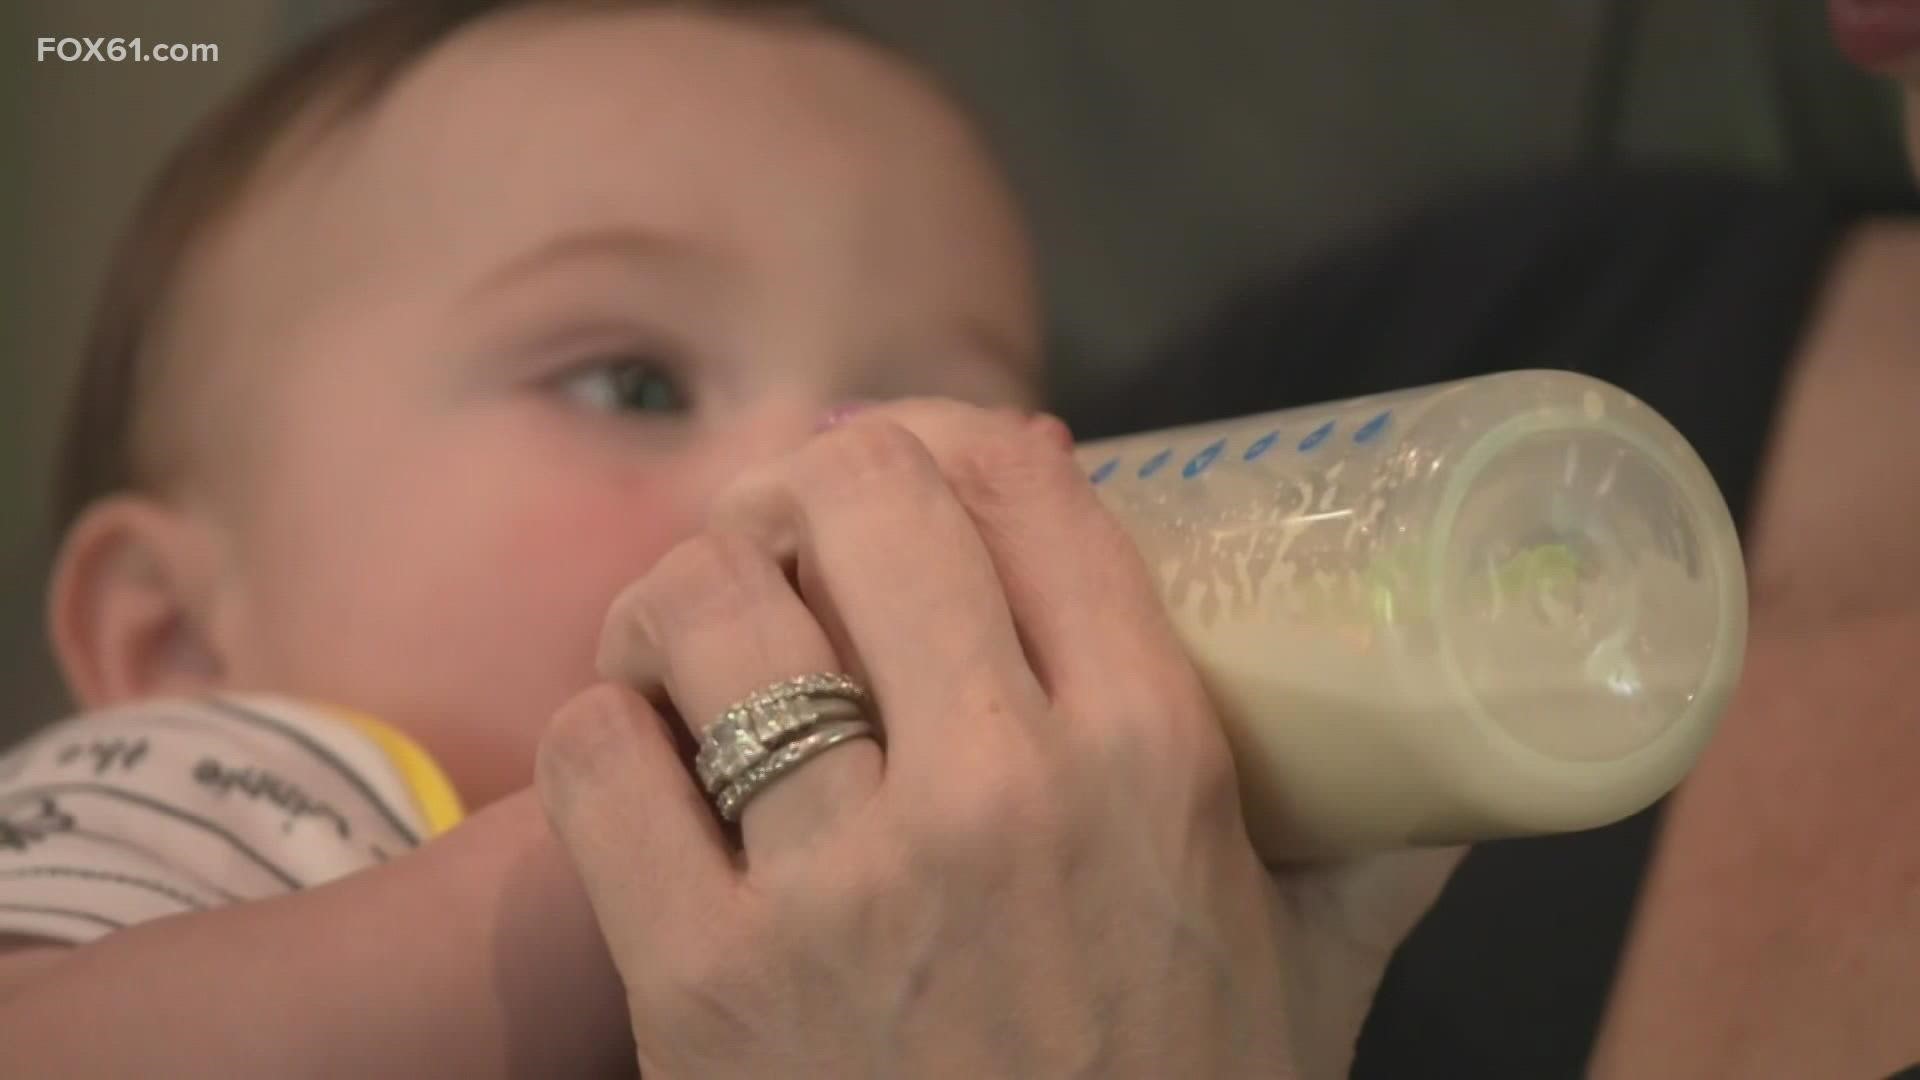 The baby formula shortage continues and for many some are going to desperate measures to find it. Experts say to be careful.